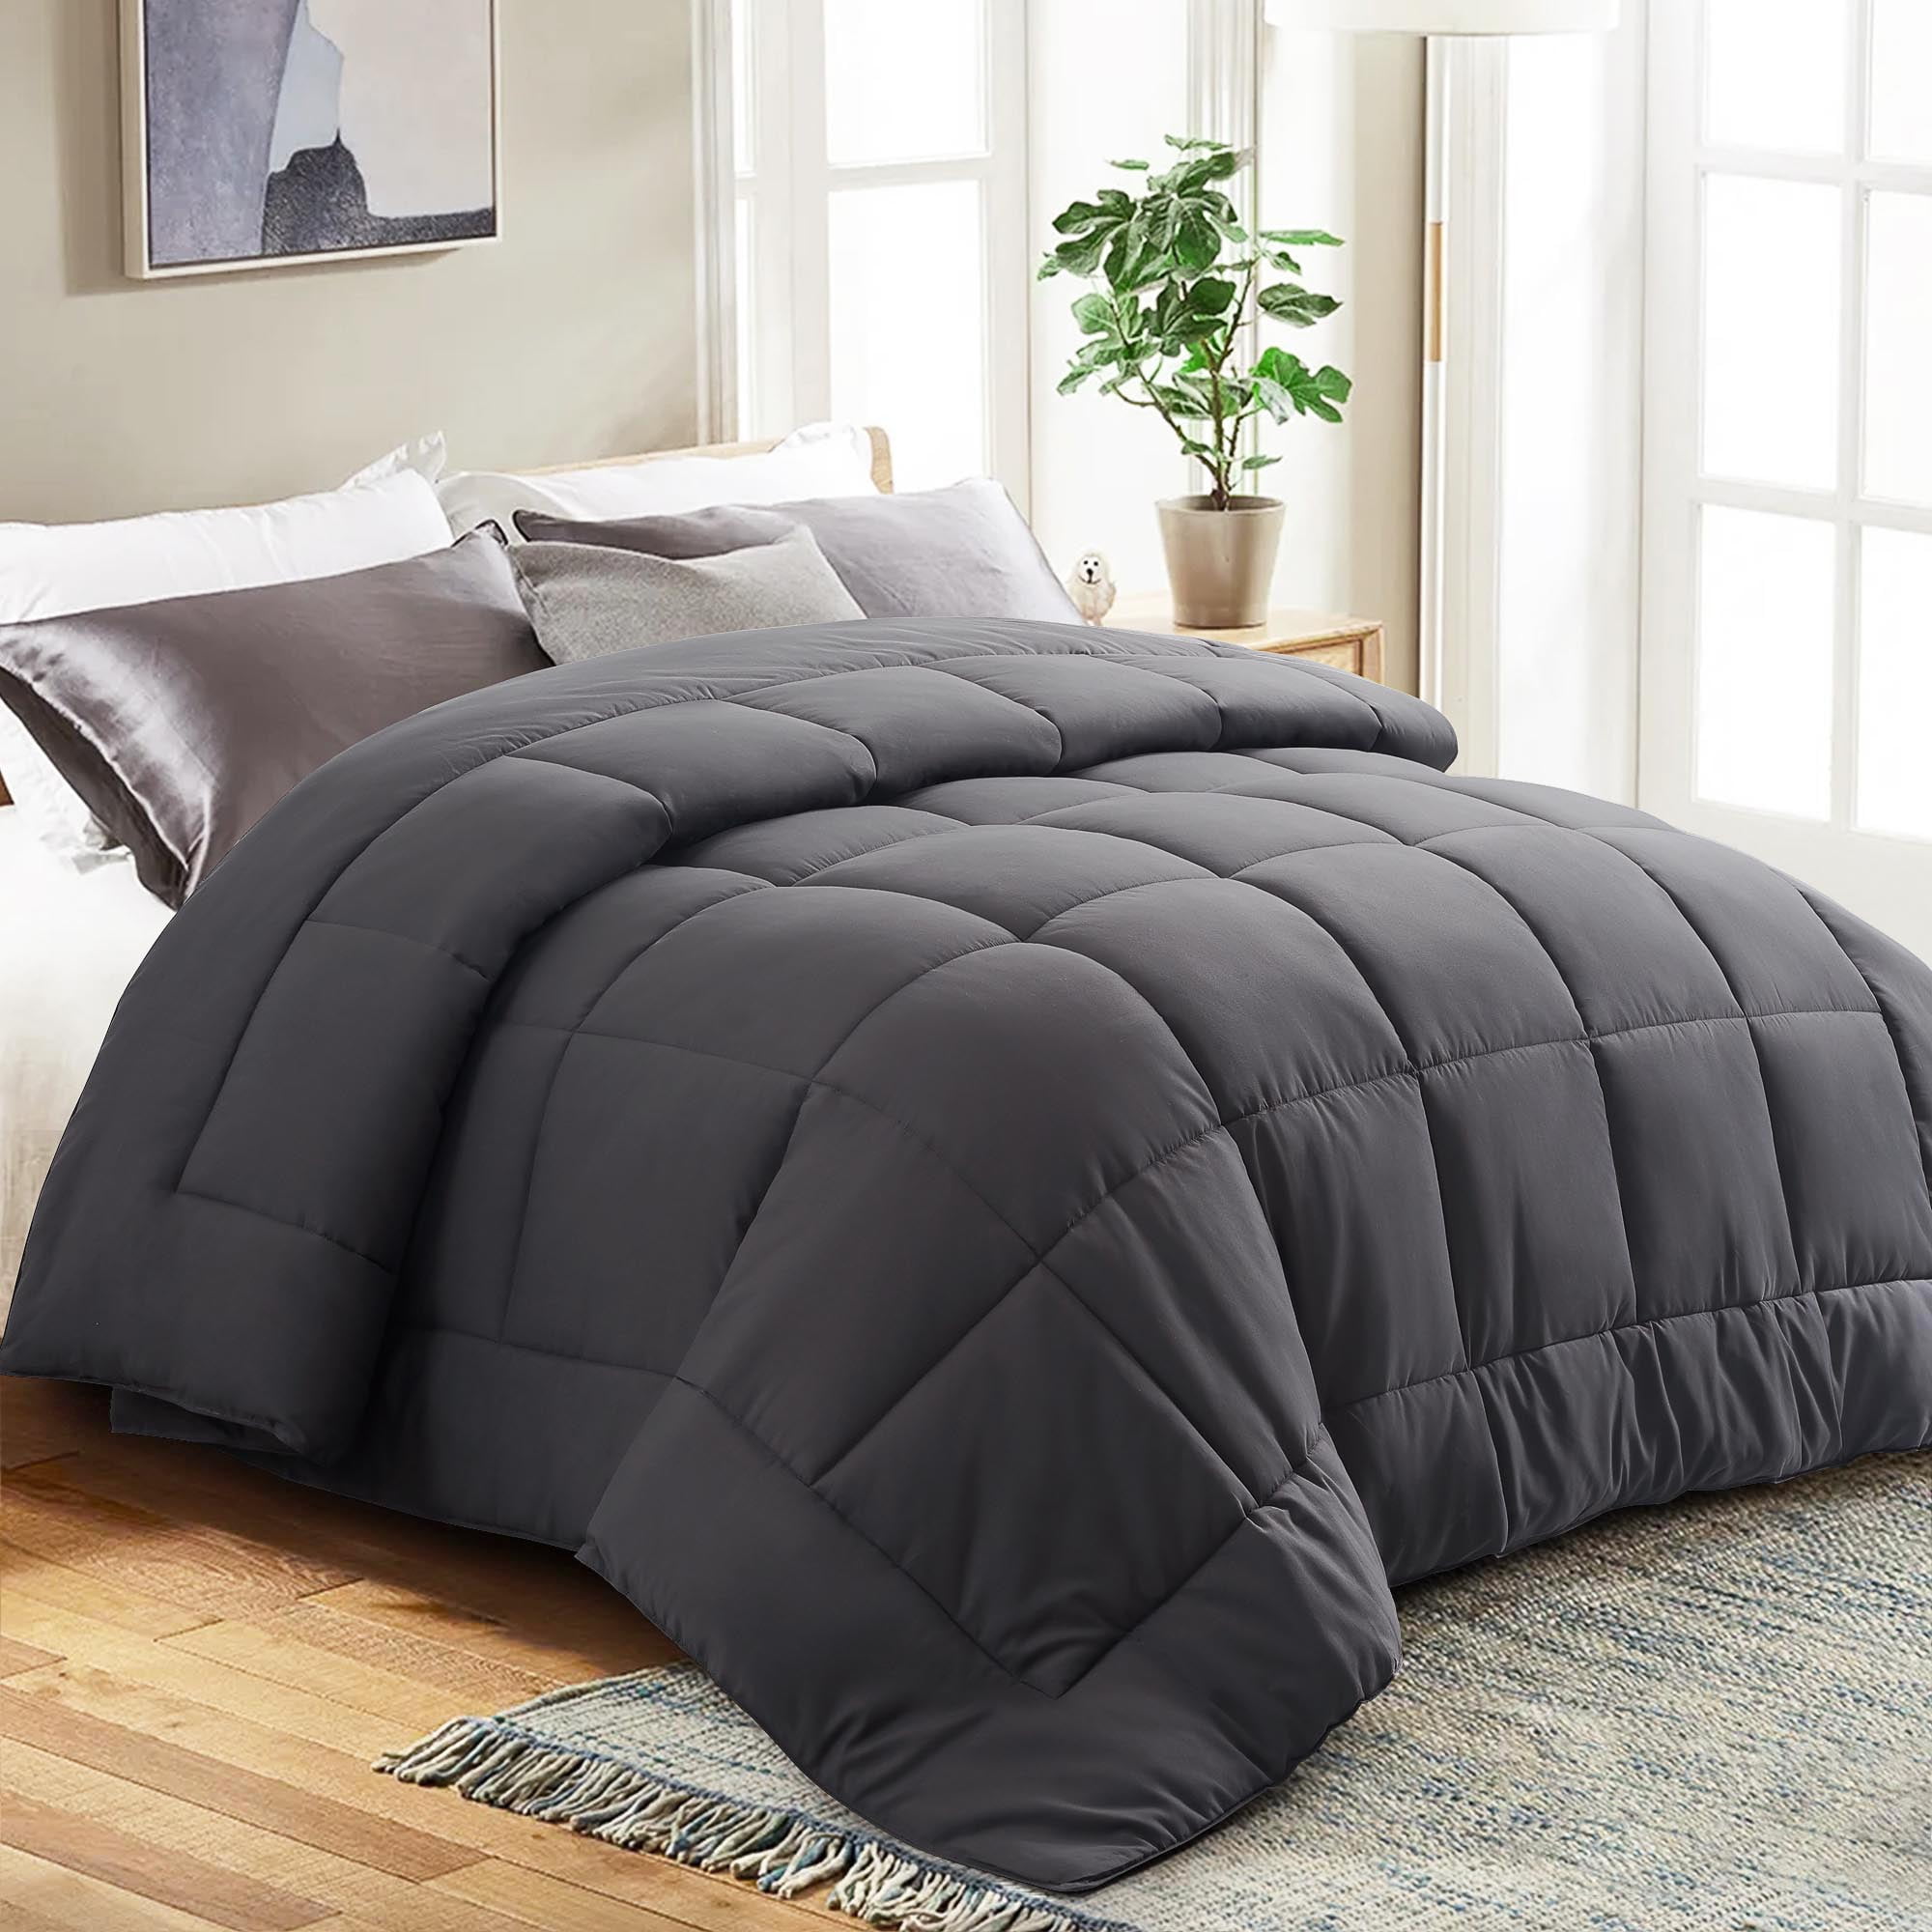 Puffy Deluxe Comforter - Twin/Twin XL - (70W x 88L)